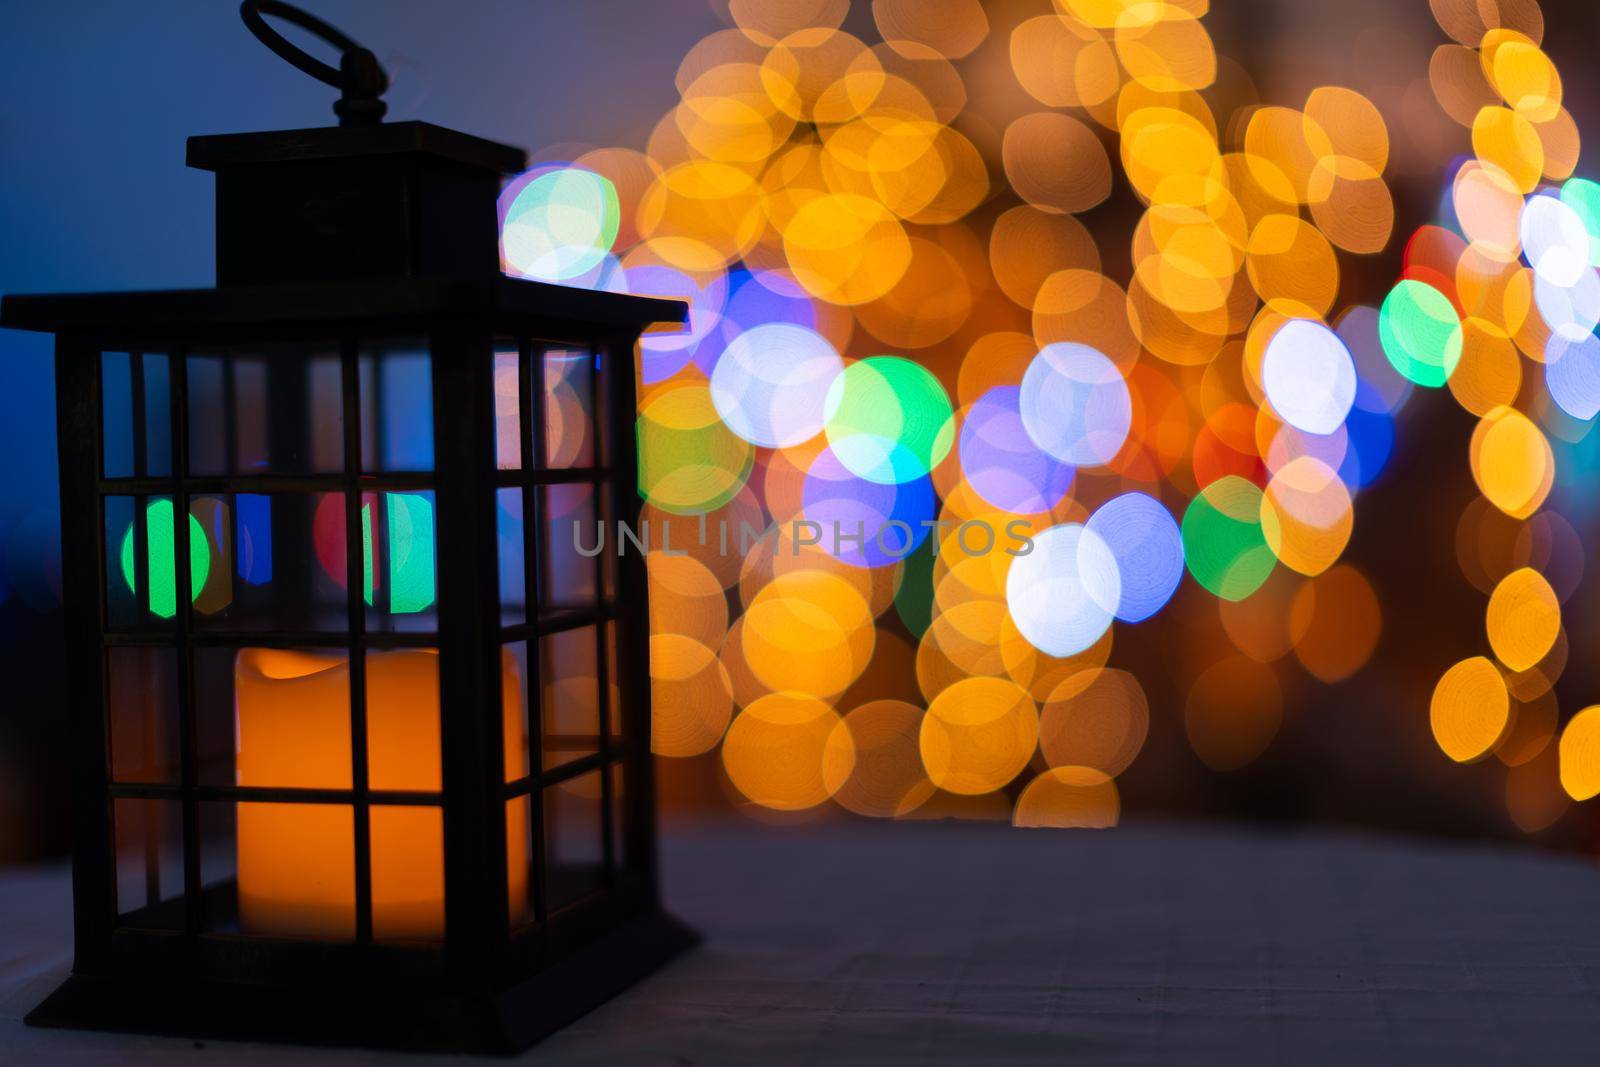 In the night frame a rectangular old hand lantern with a glowing candle in the center. In the distance a blurred background created from the bokeh of glowing Christmas tree lights